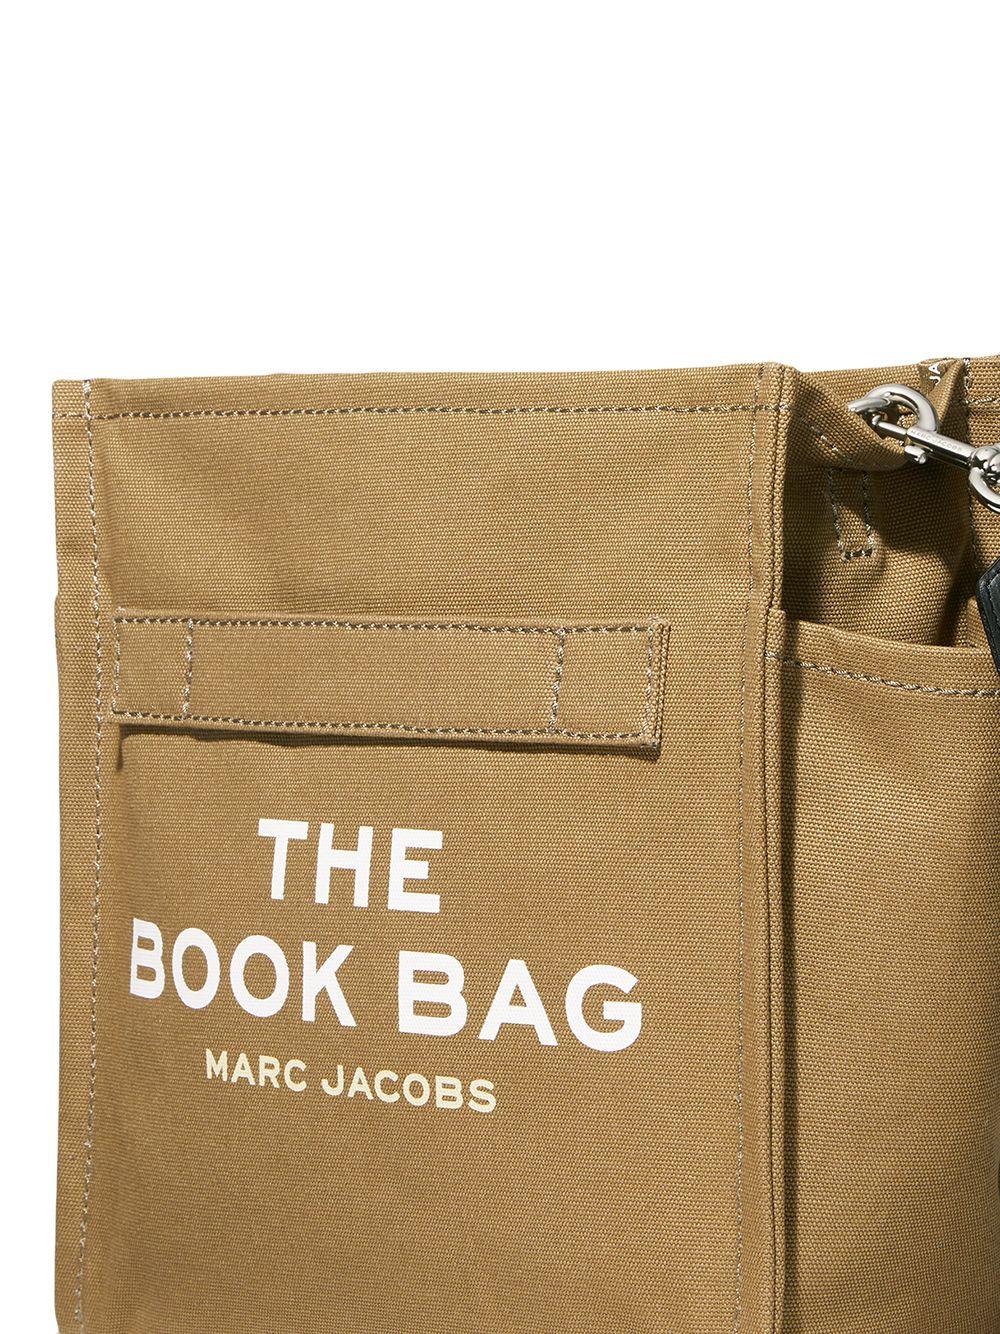 The Book Bag Marc Jacobs in canvas